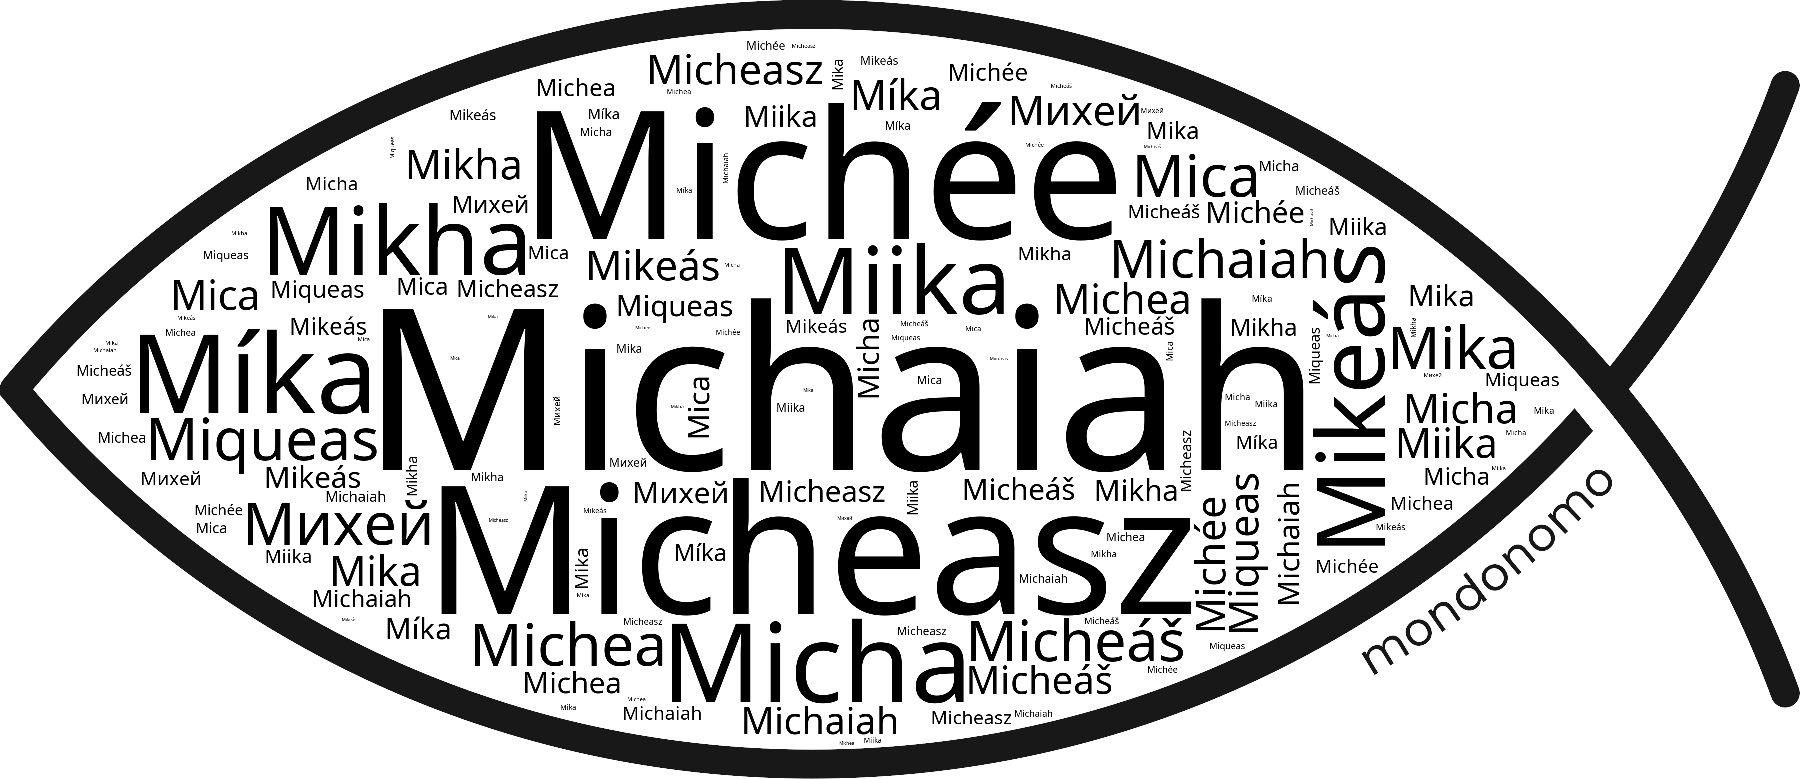 Name Michaiah in the world's Bibles